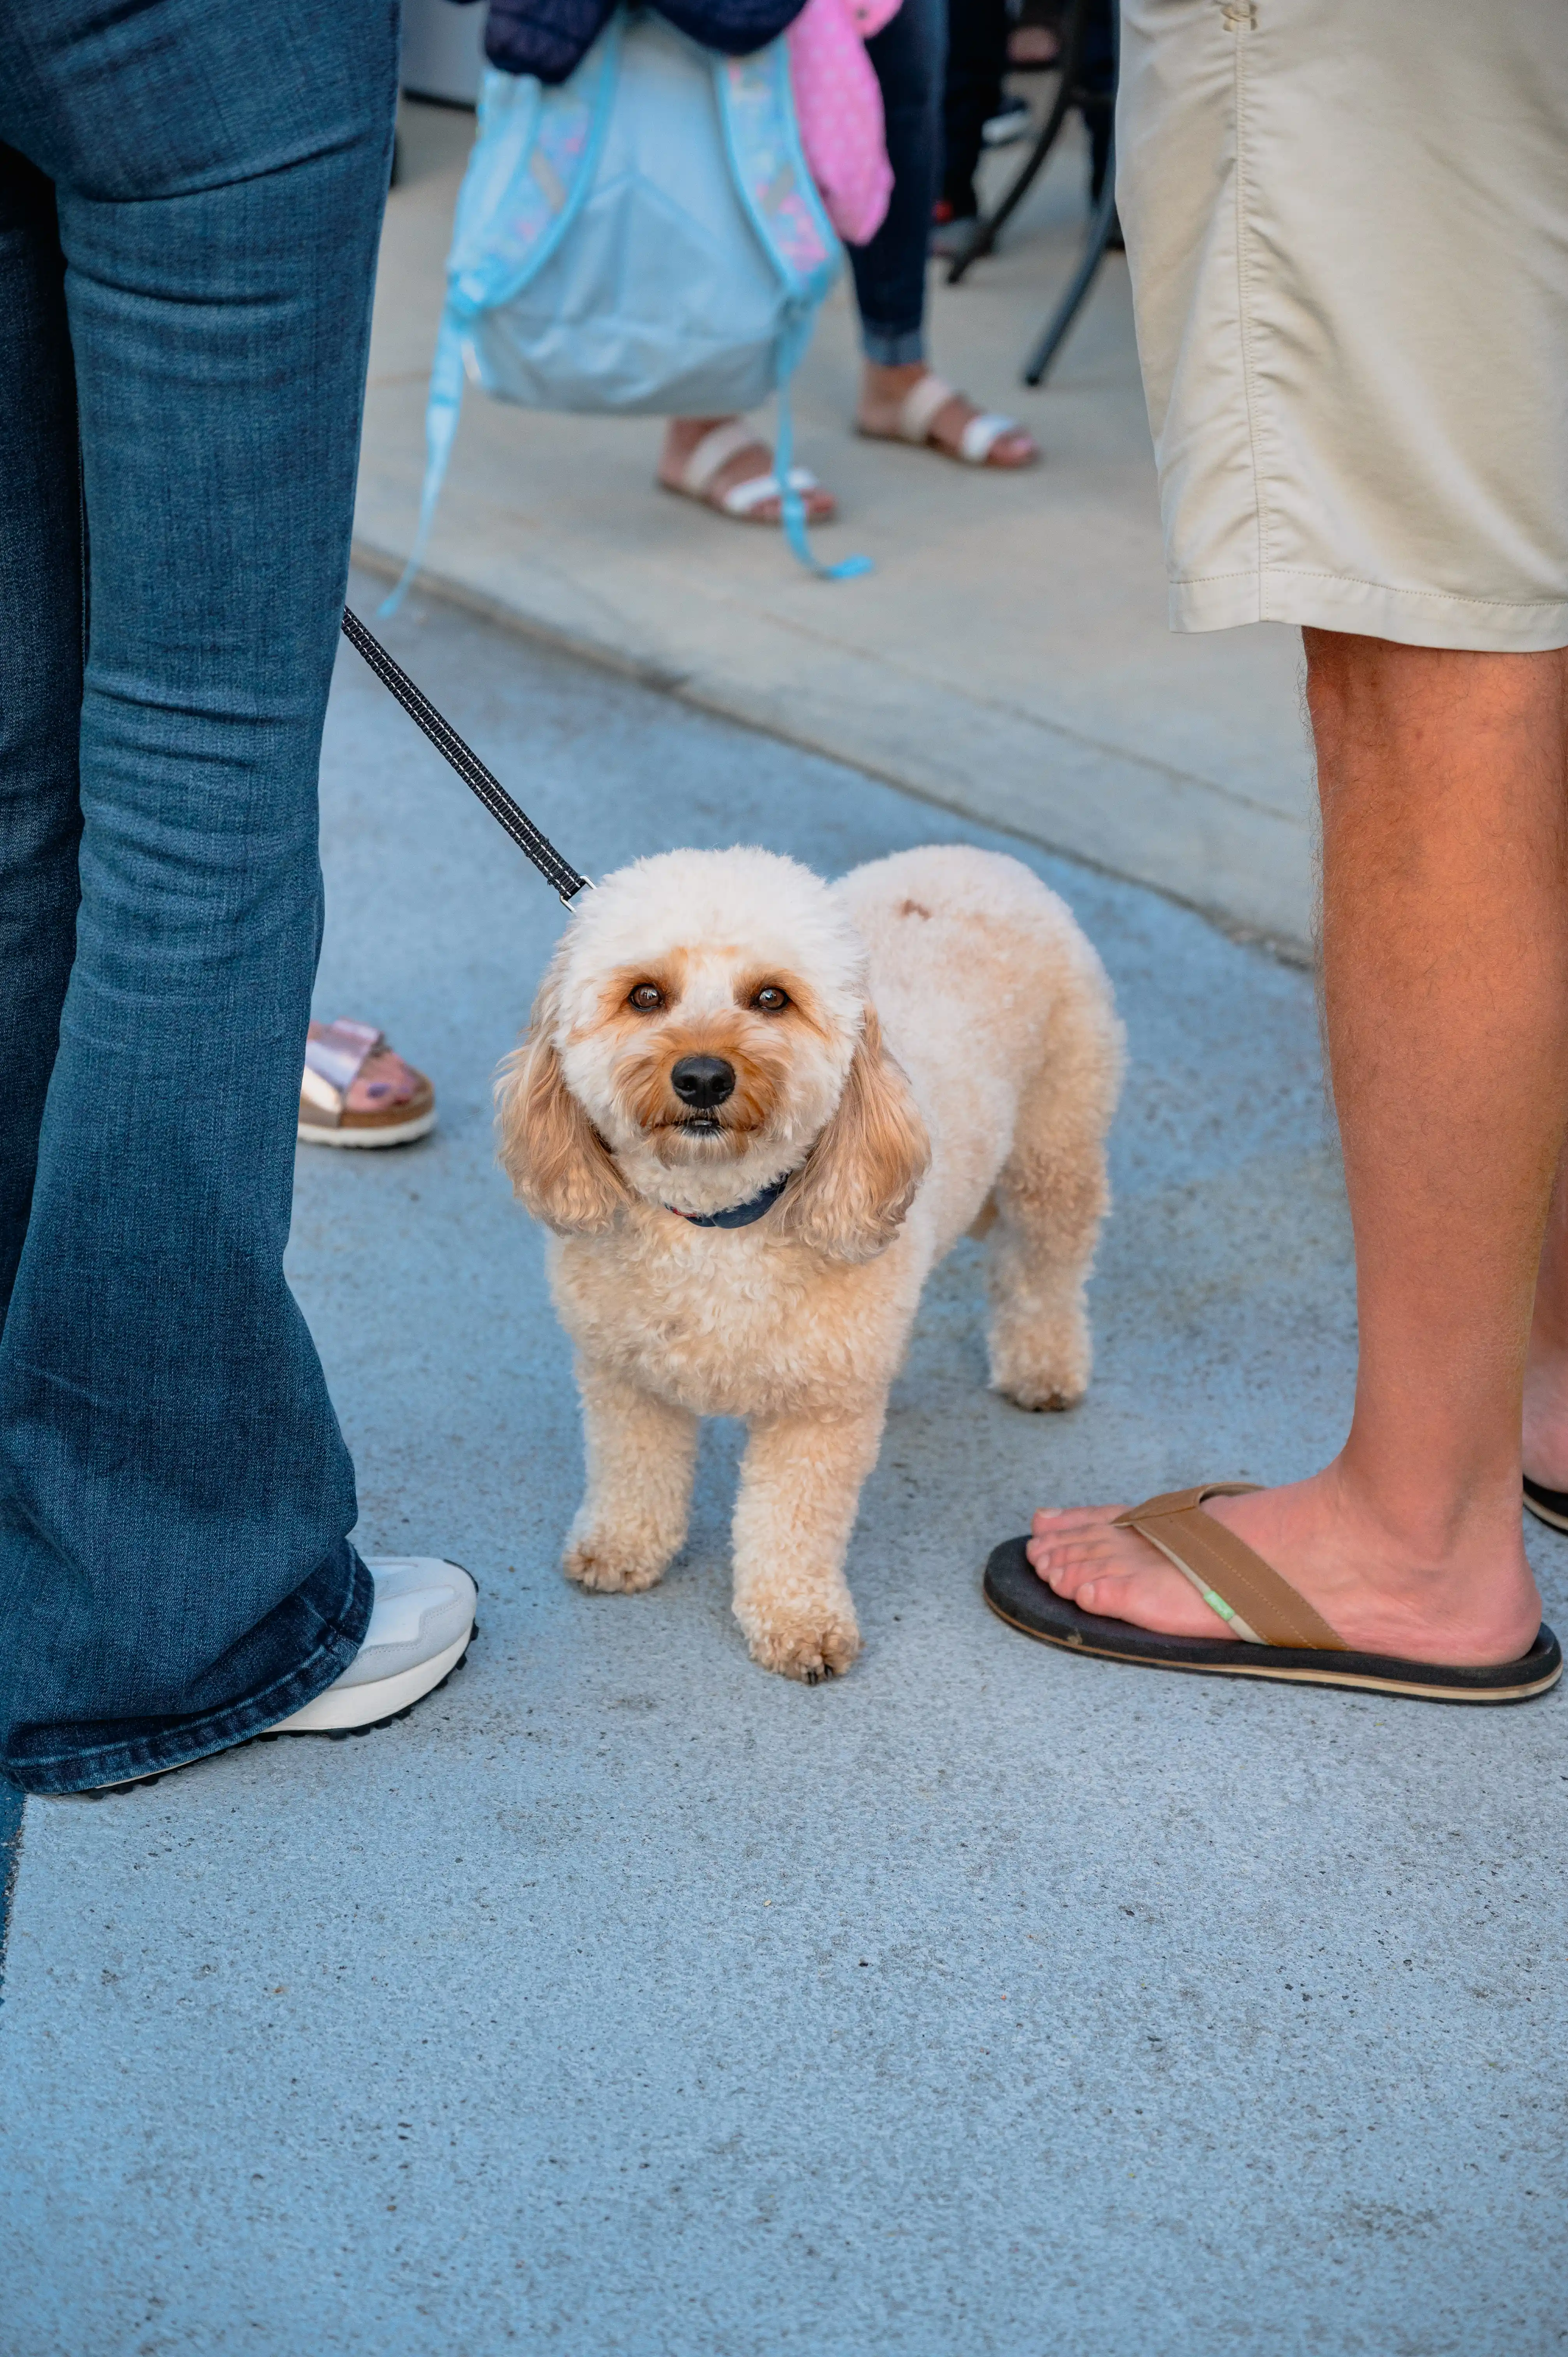 A small fluffy cream-colored dog on a leash looking up surrounded by people's legs and feet on a sidewalk.